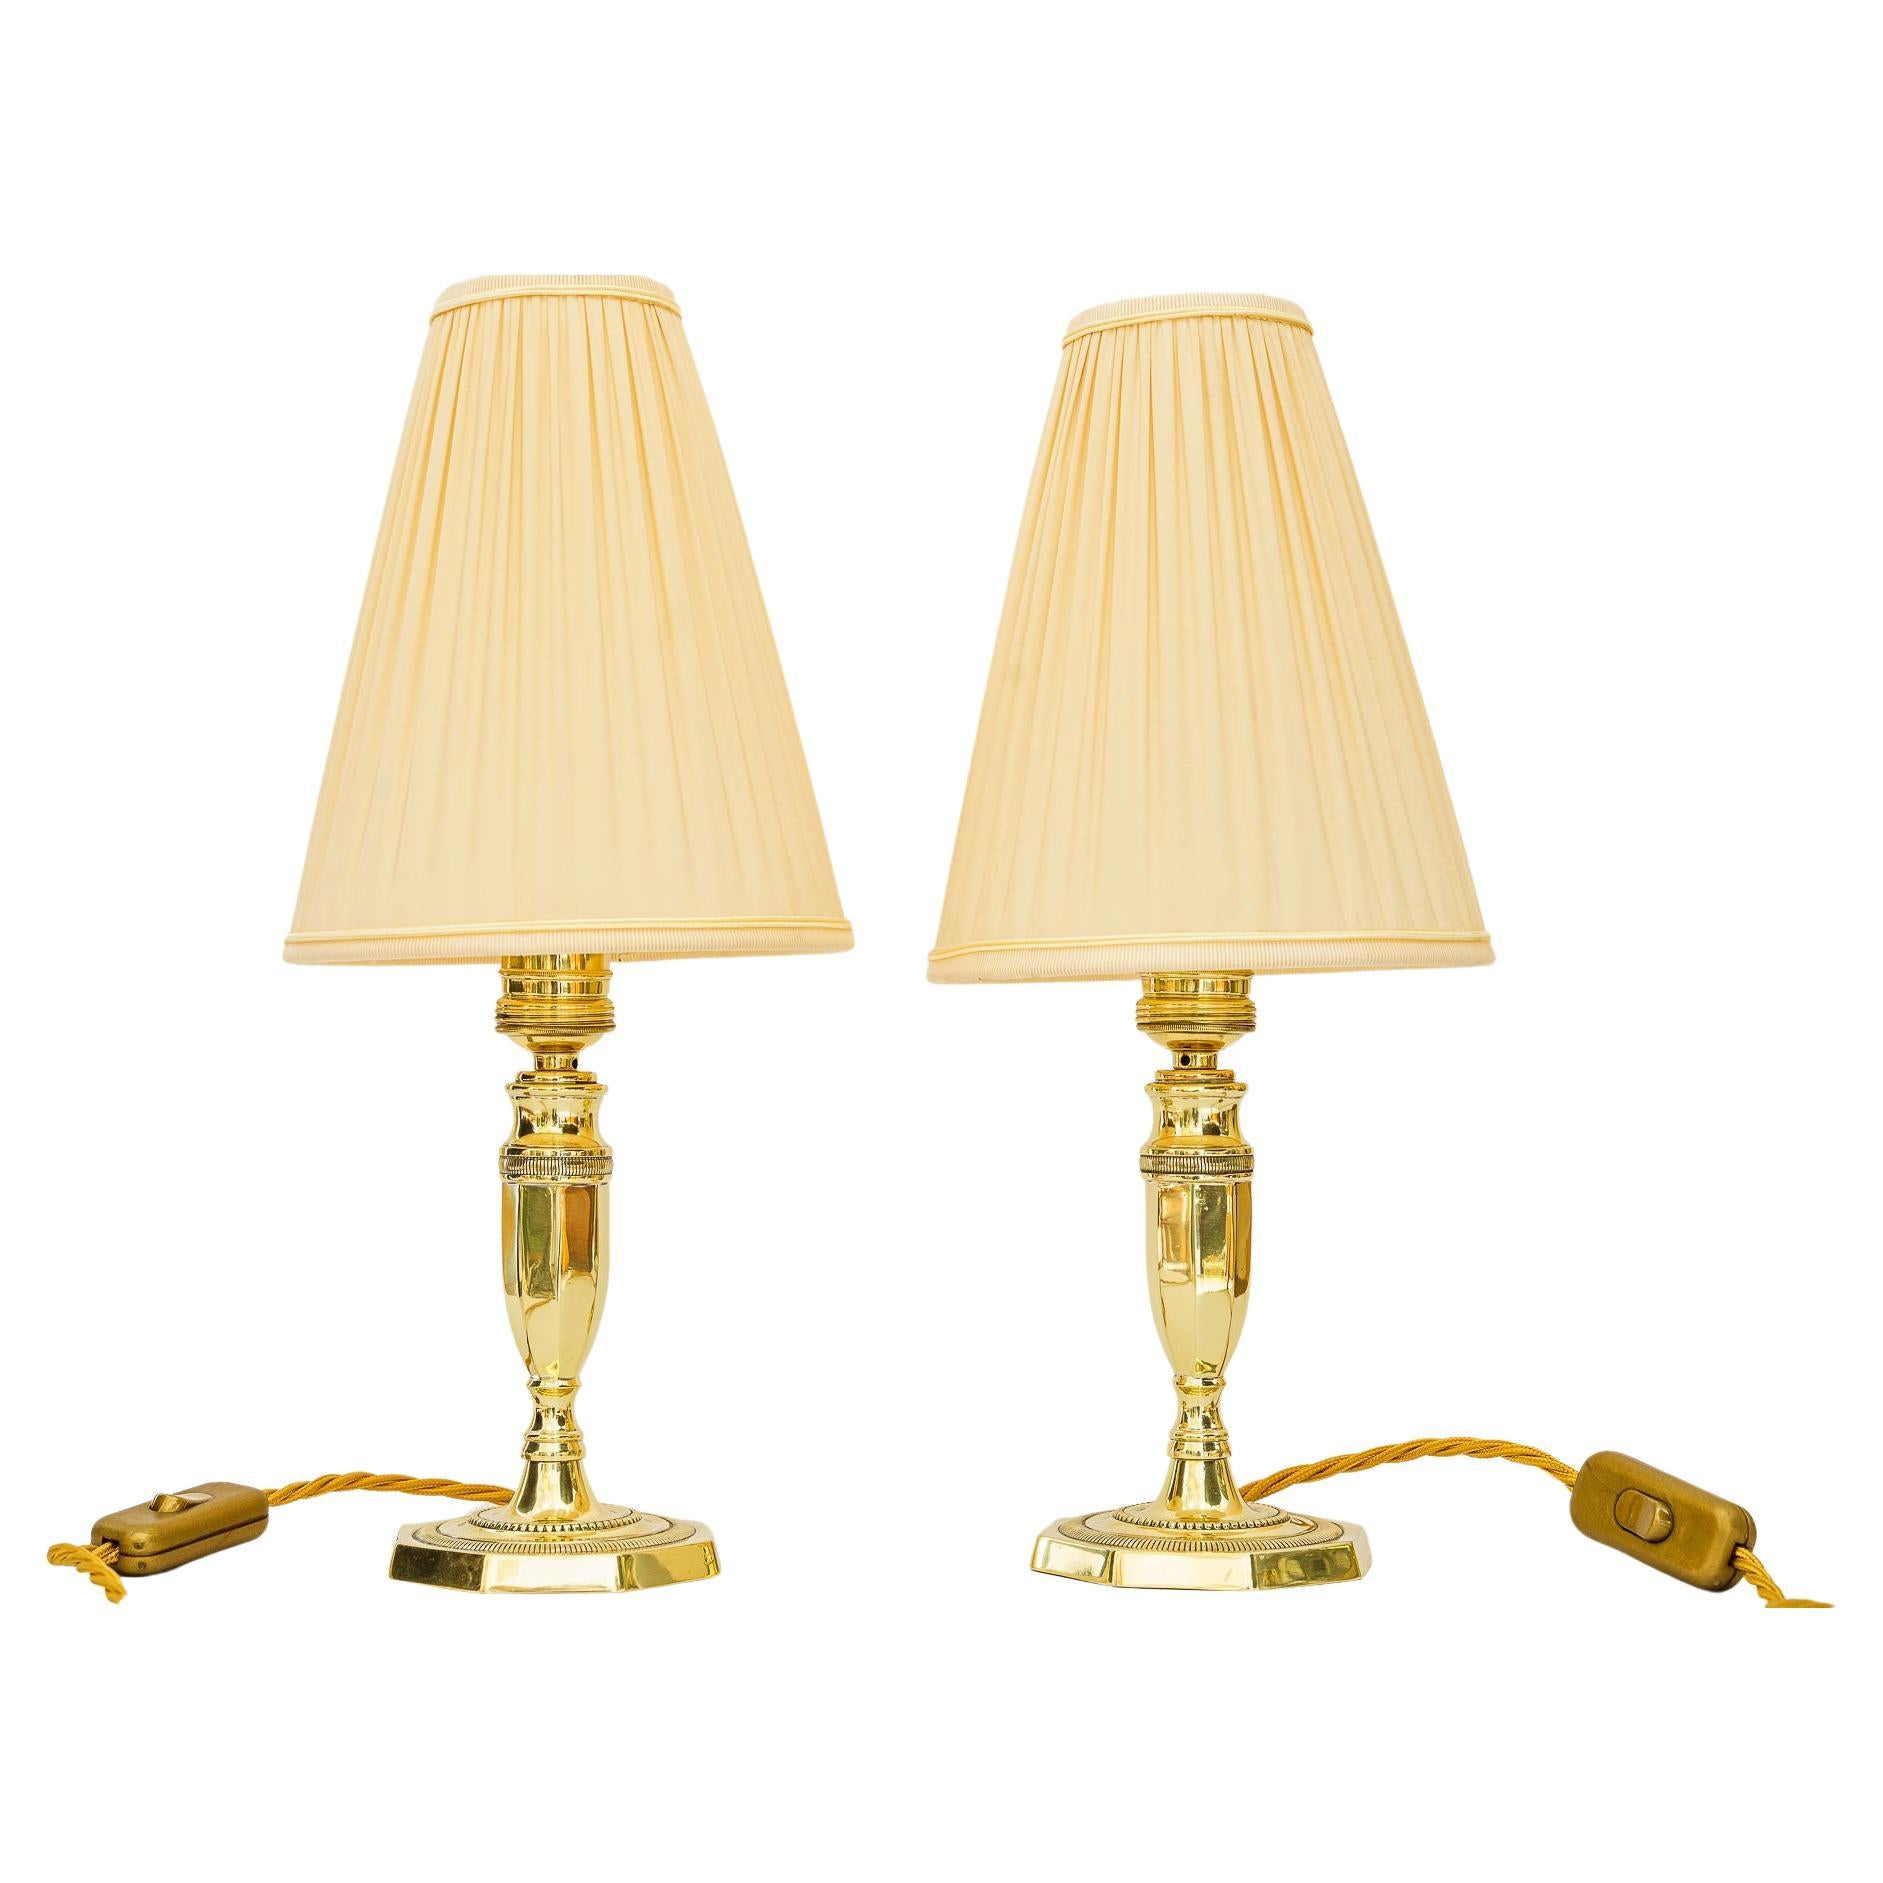 2 Art Deco table lamps with fabric shades vienna around 1920s